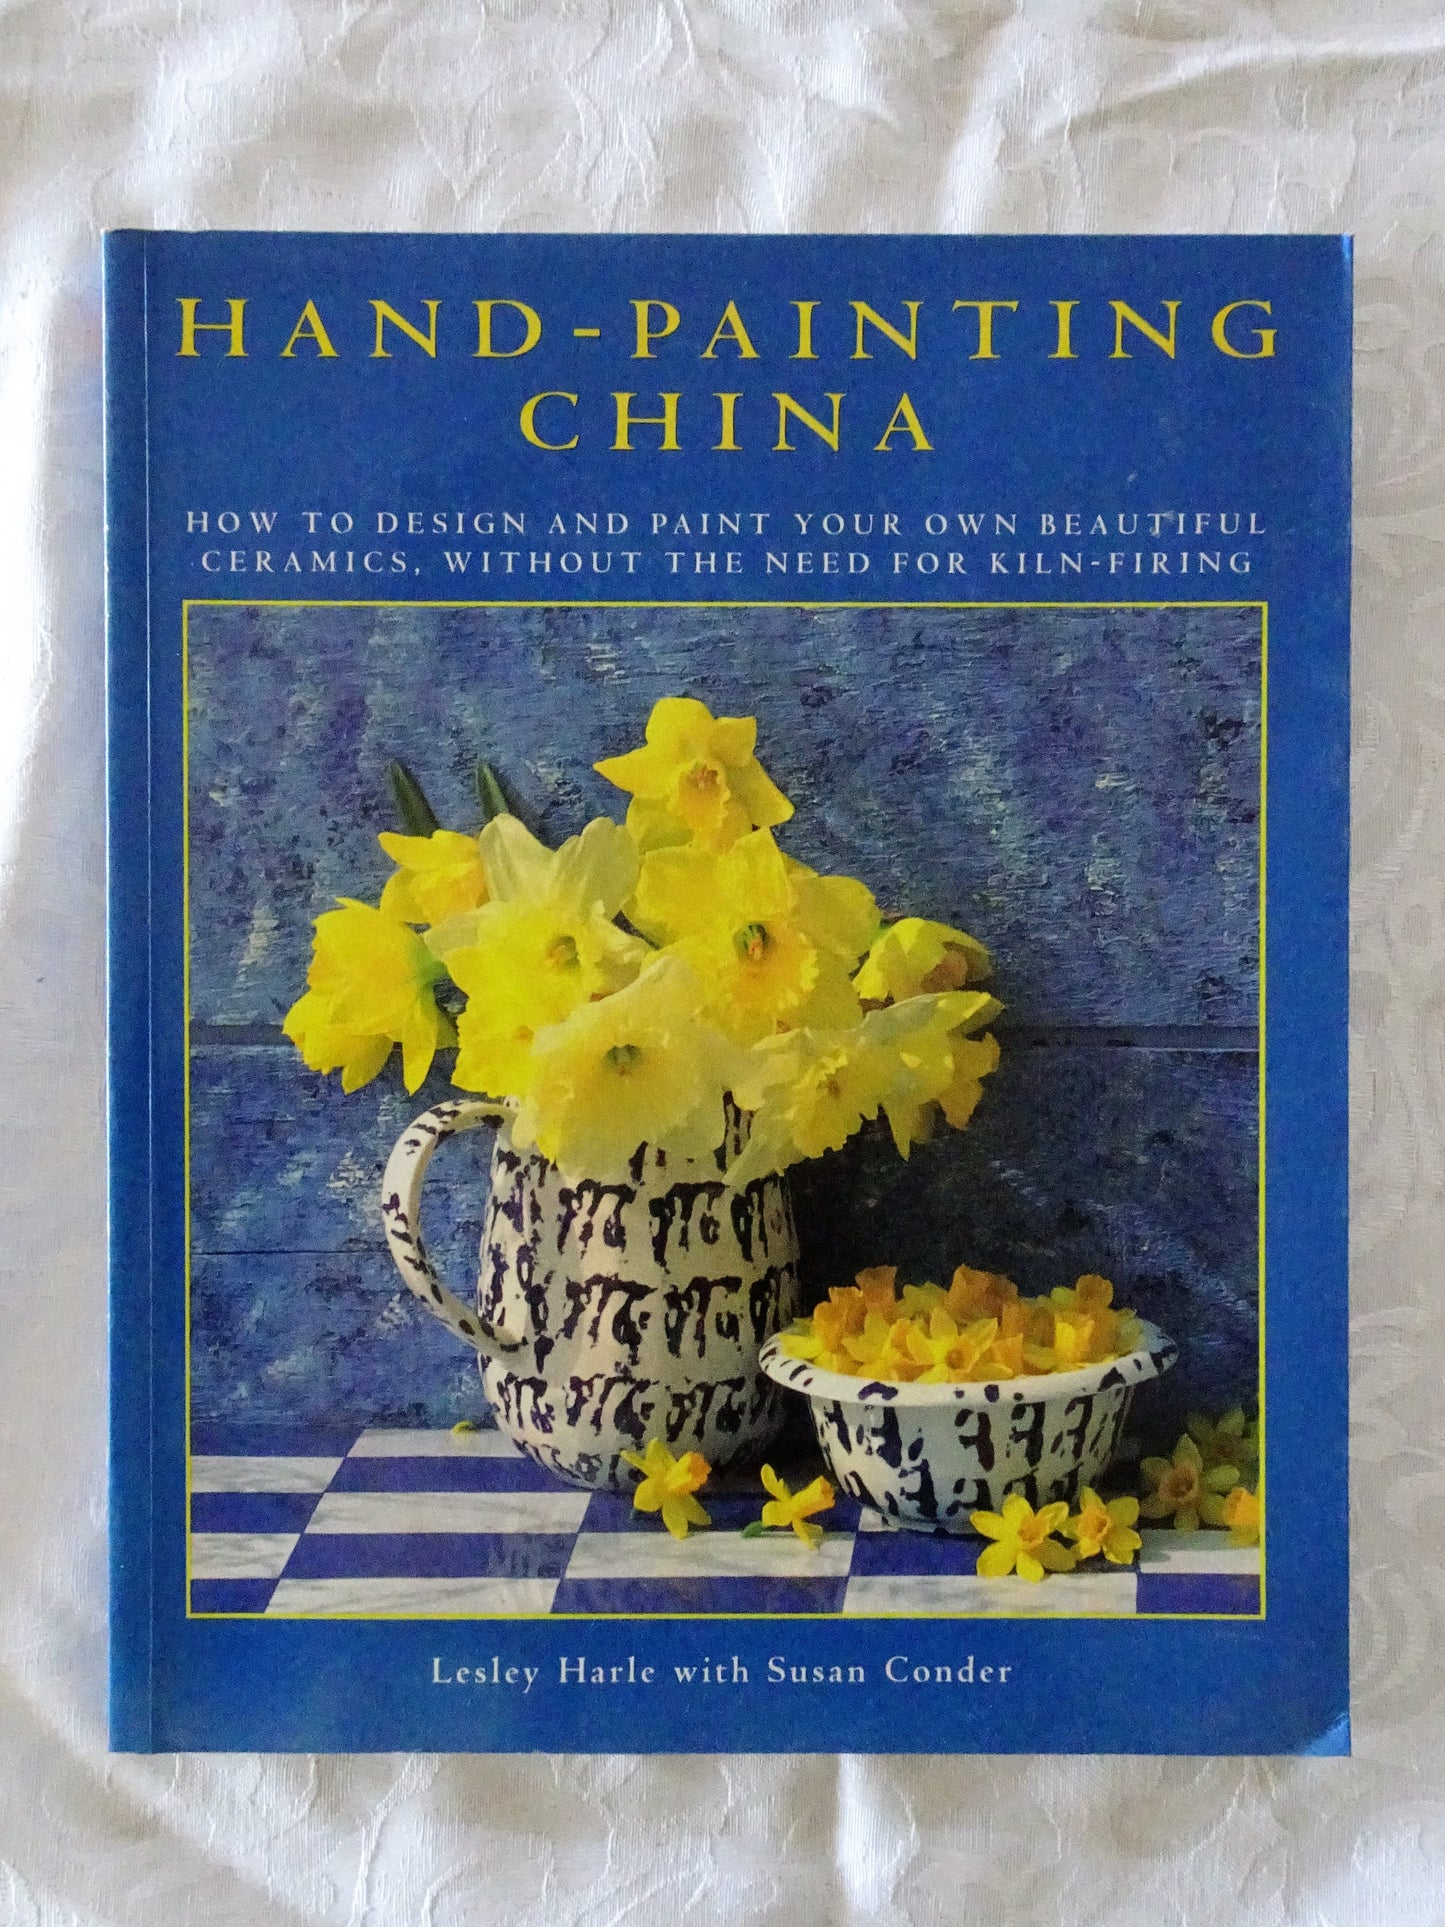 Hand-Painting China by Lesley Harle and Susan Conder